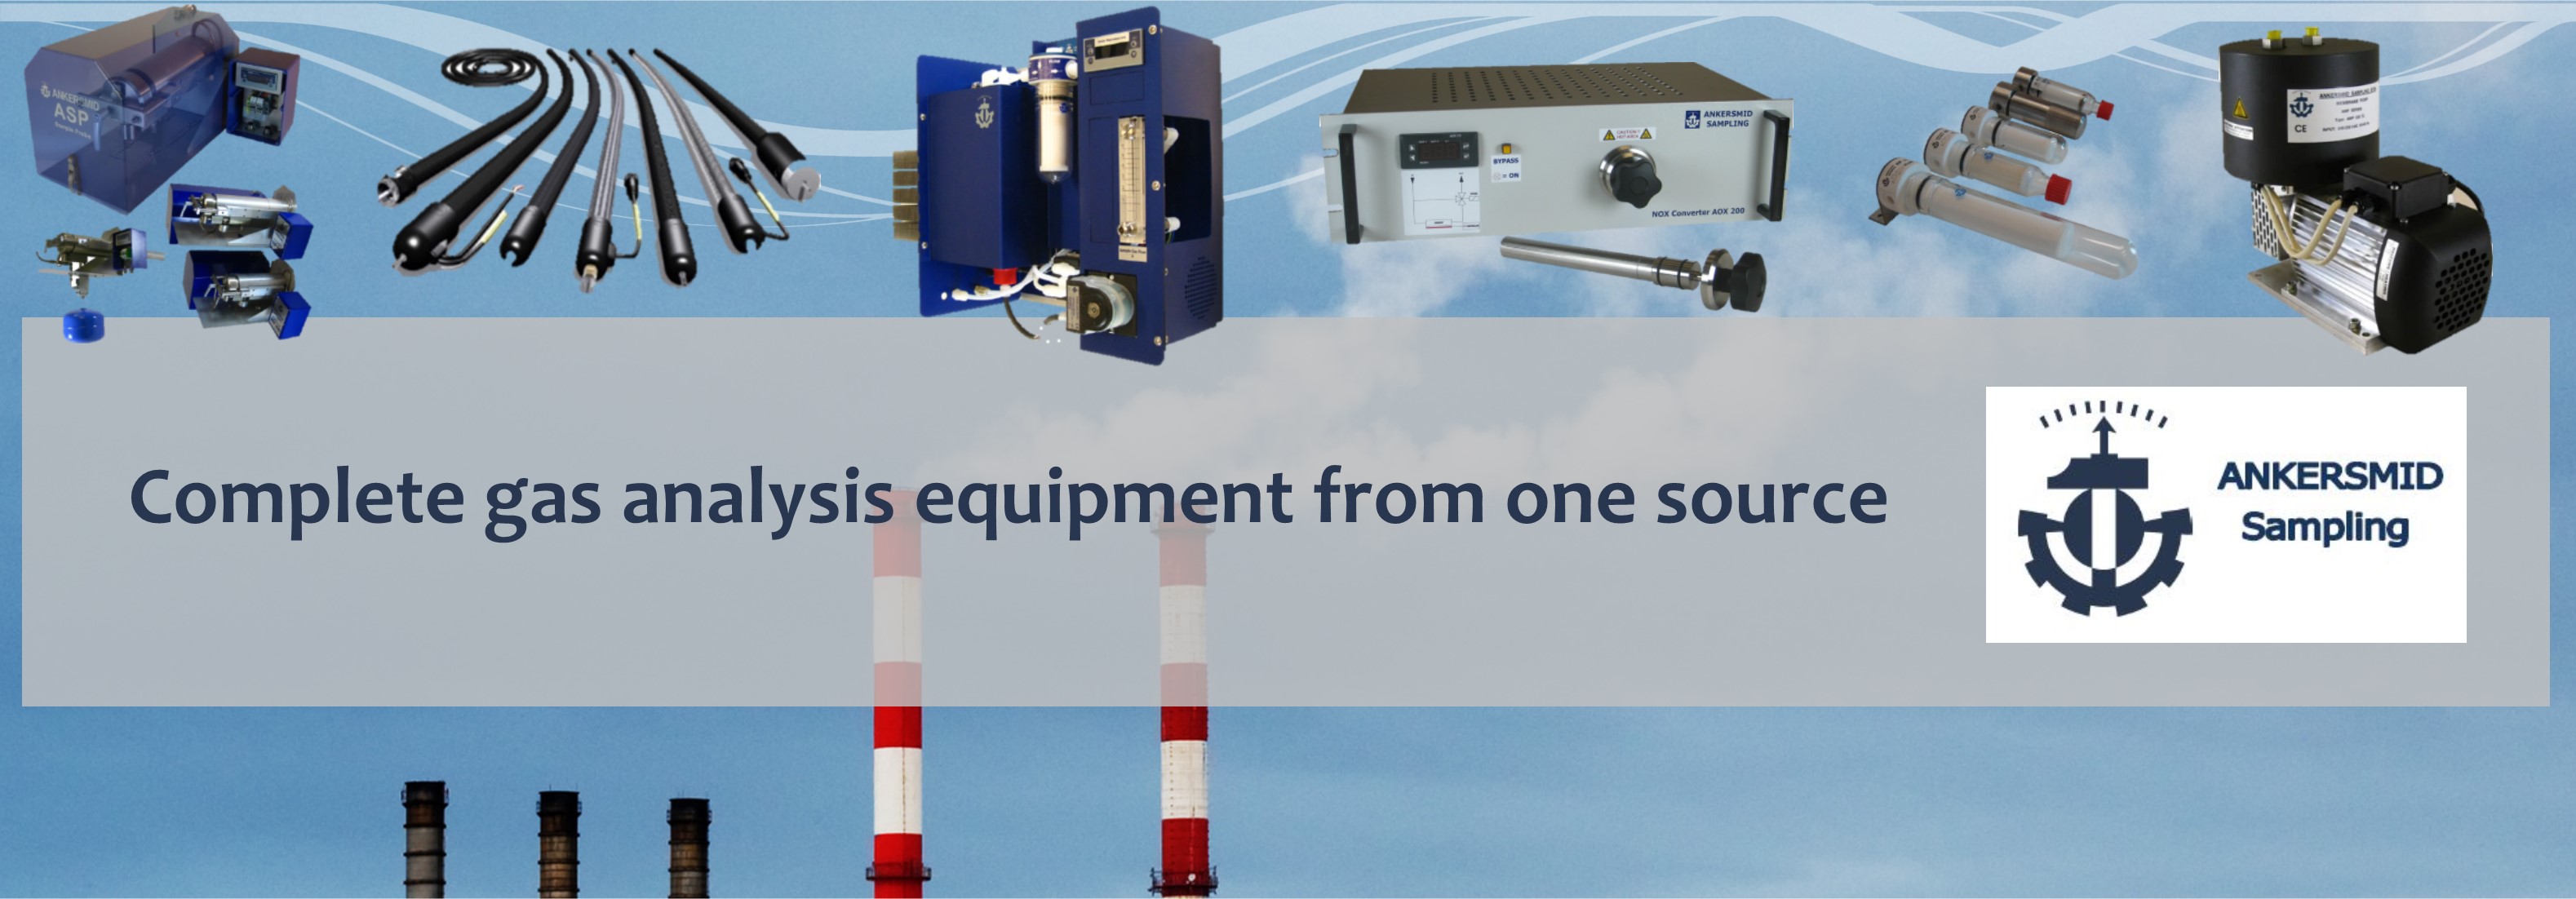 complete gas analysis equipment from one source